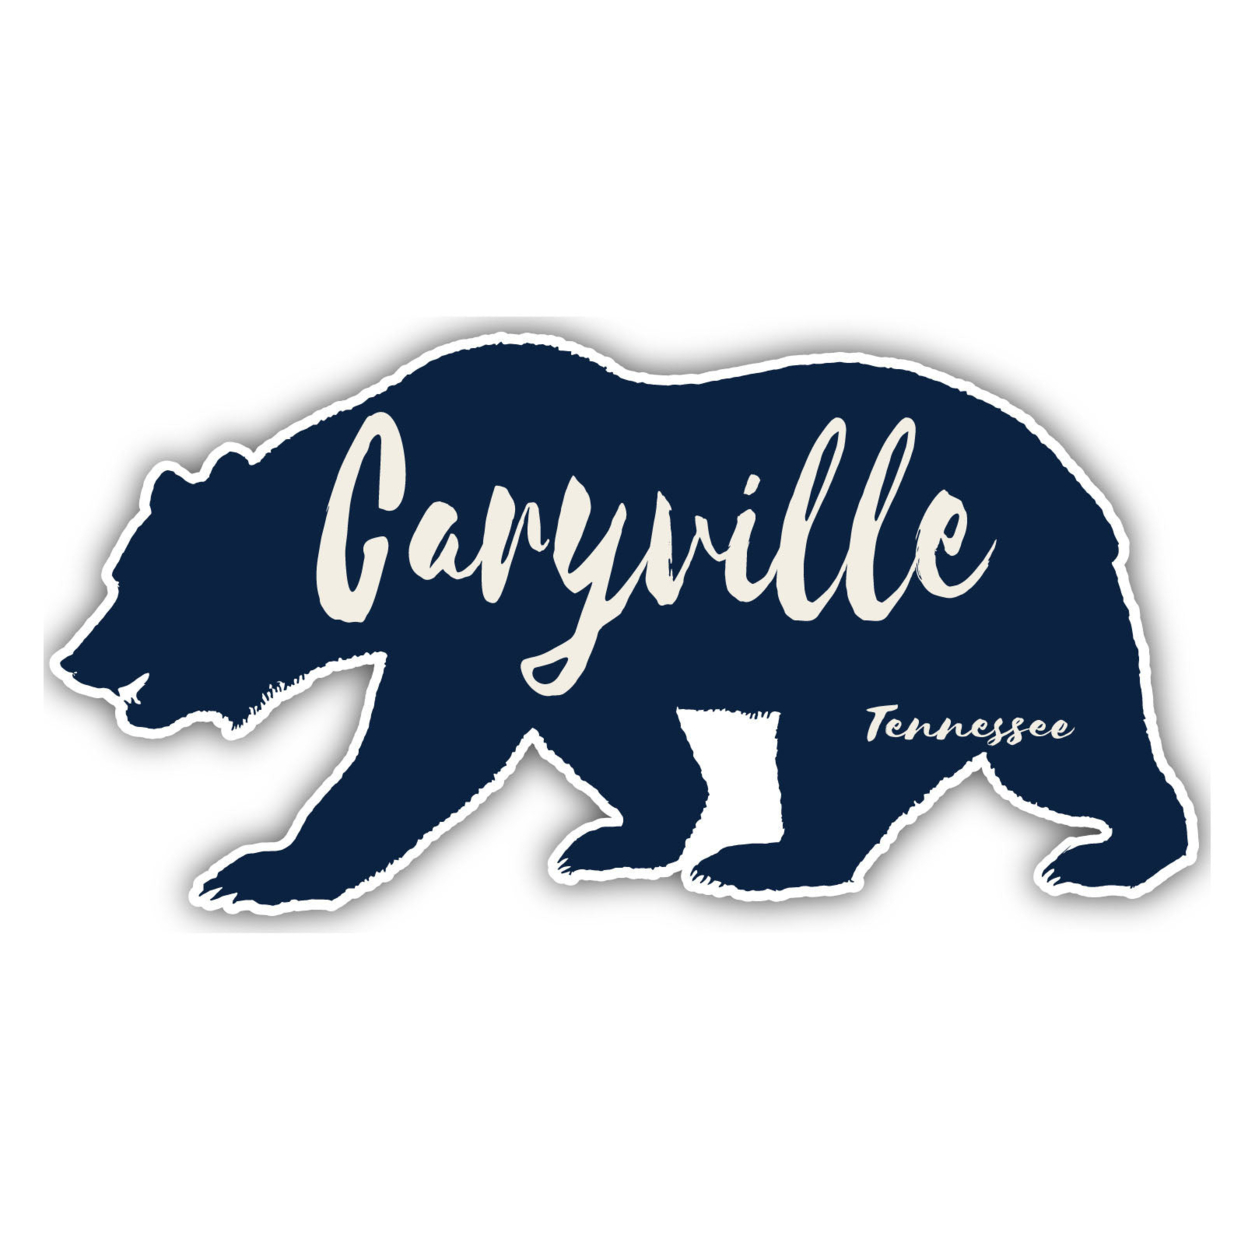 Caryville Tennessee Souvenir Decorative Stickers (Choose Theme And Size) - Single Unit, 8-Inch, Tent